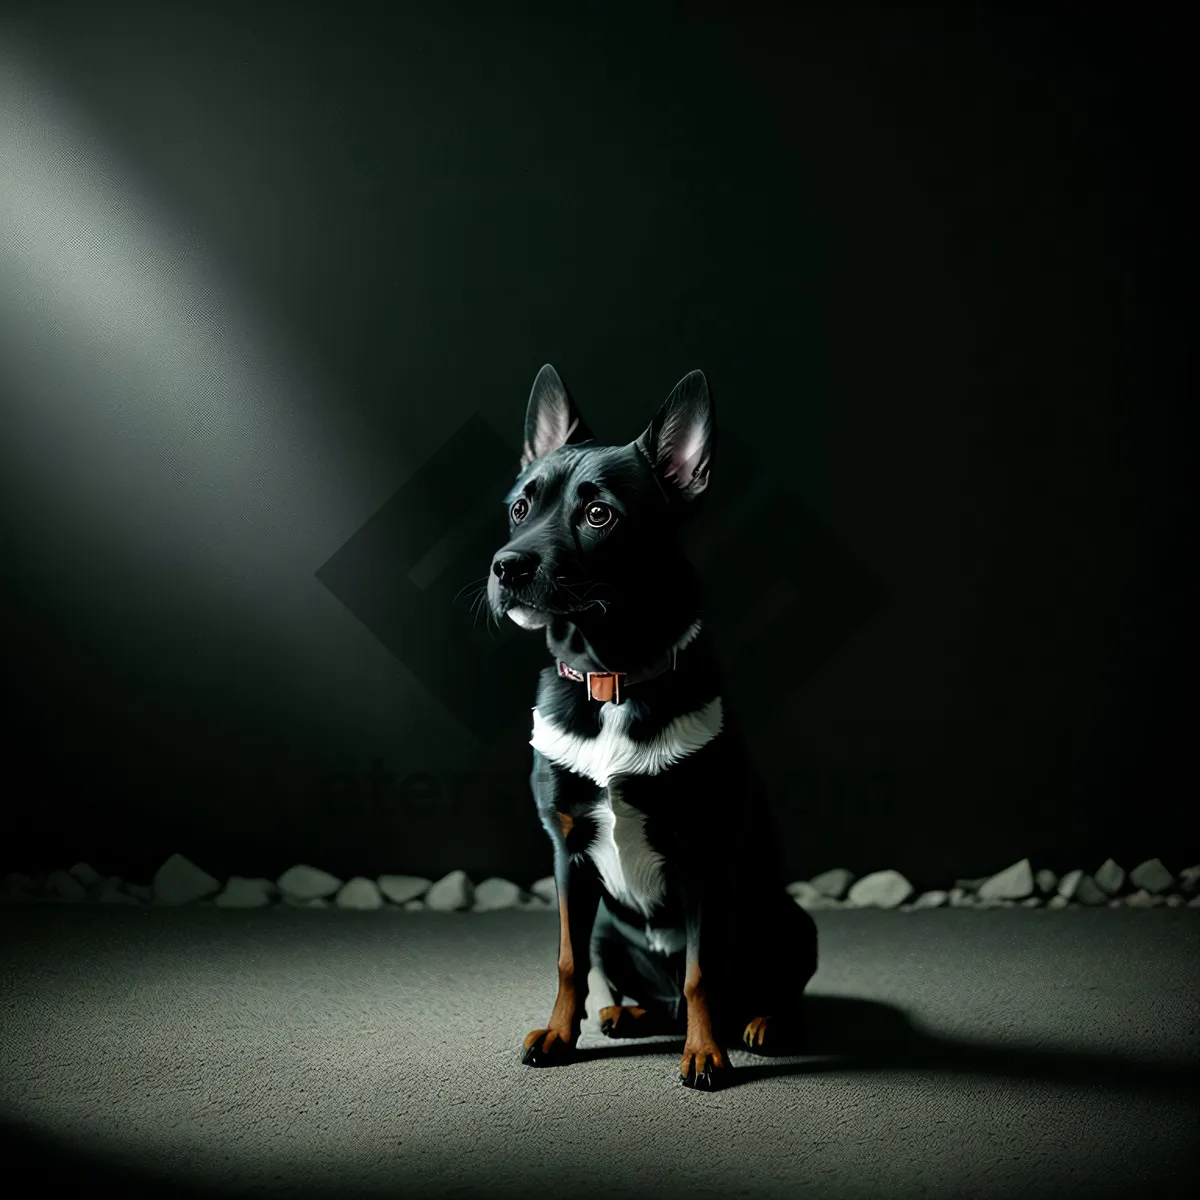 Picture of Black Chihuahua Dog Wearing Supportive Harness